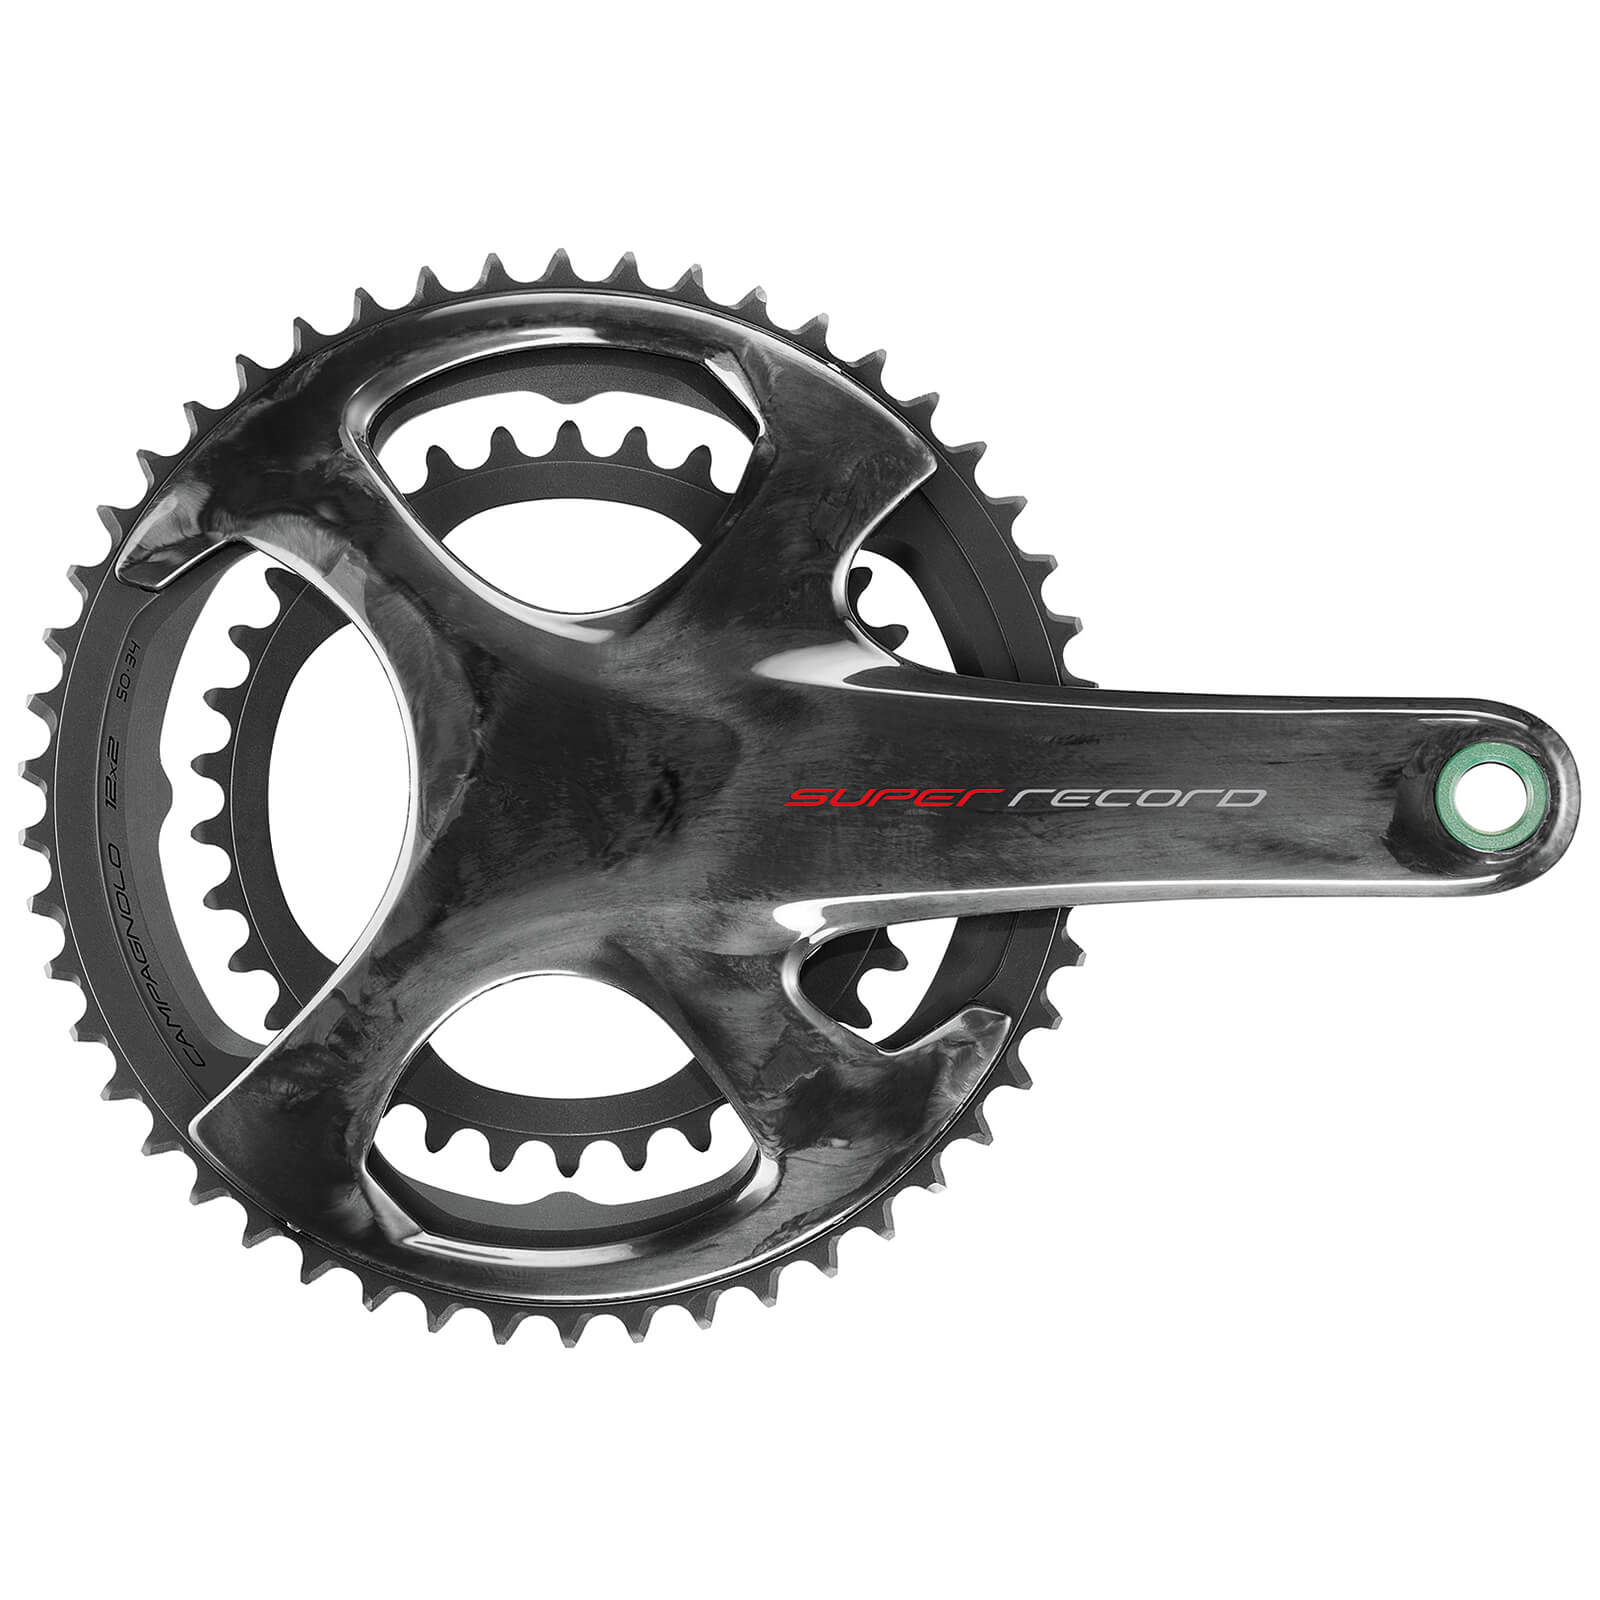 Campagnolo Super Record UT TI Carbon 12 Speed Chainset - 50-34T - 172.5mm